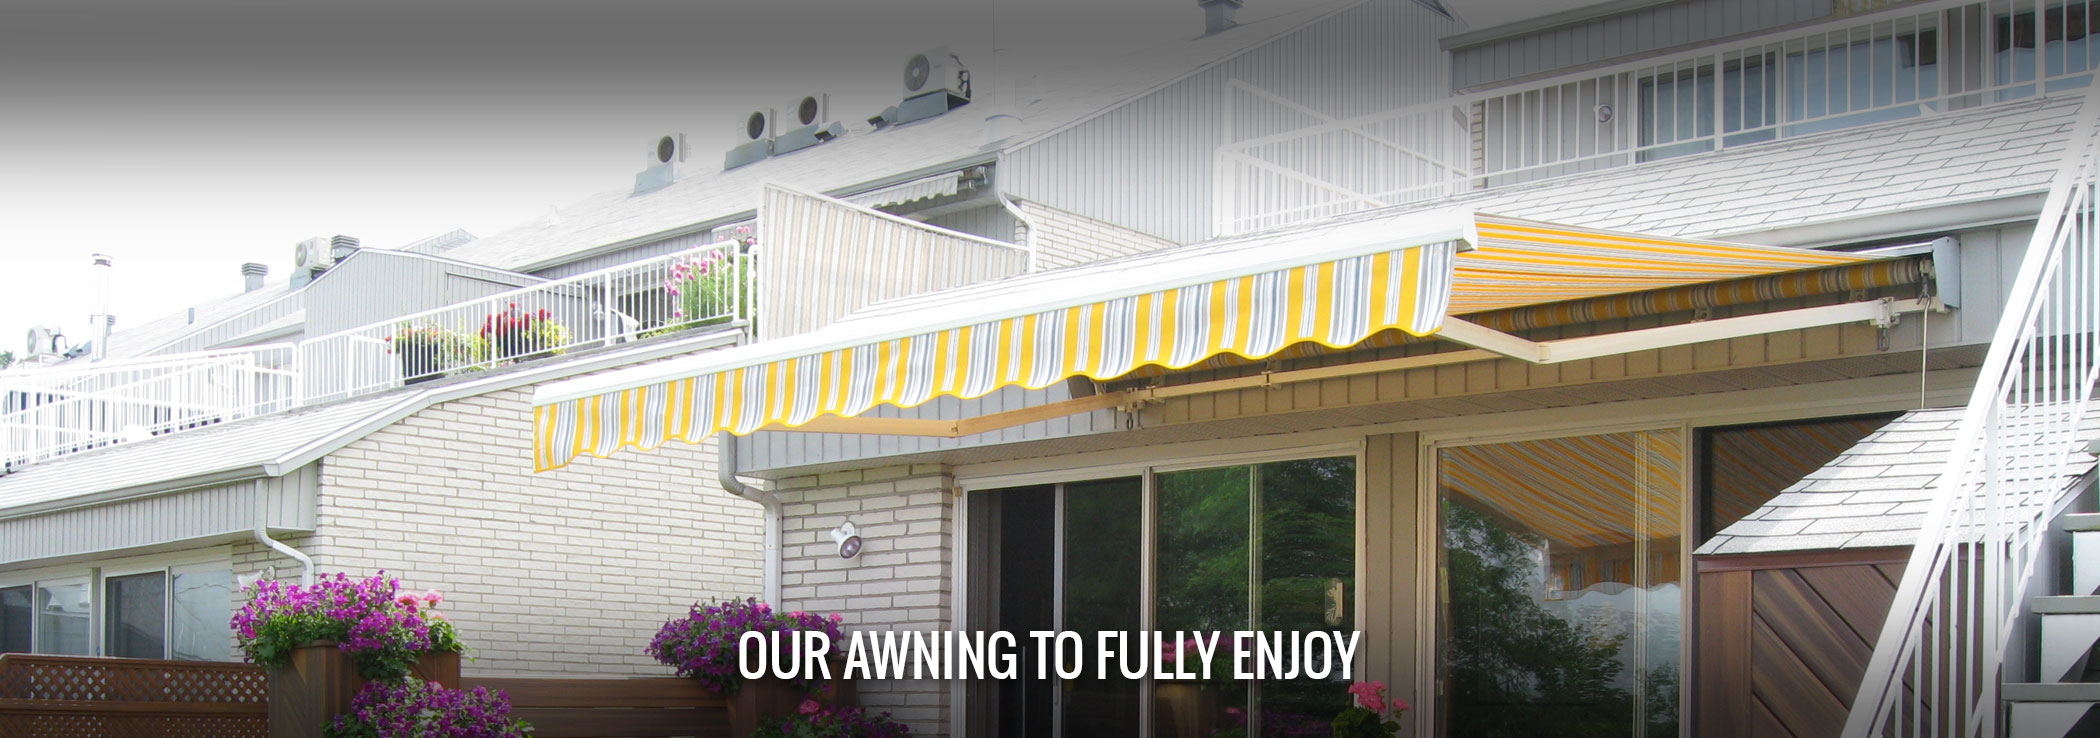 Awning Manufacturer, Auvents Valleyfield